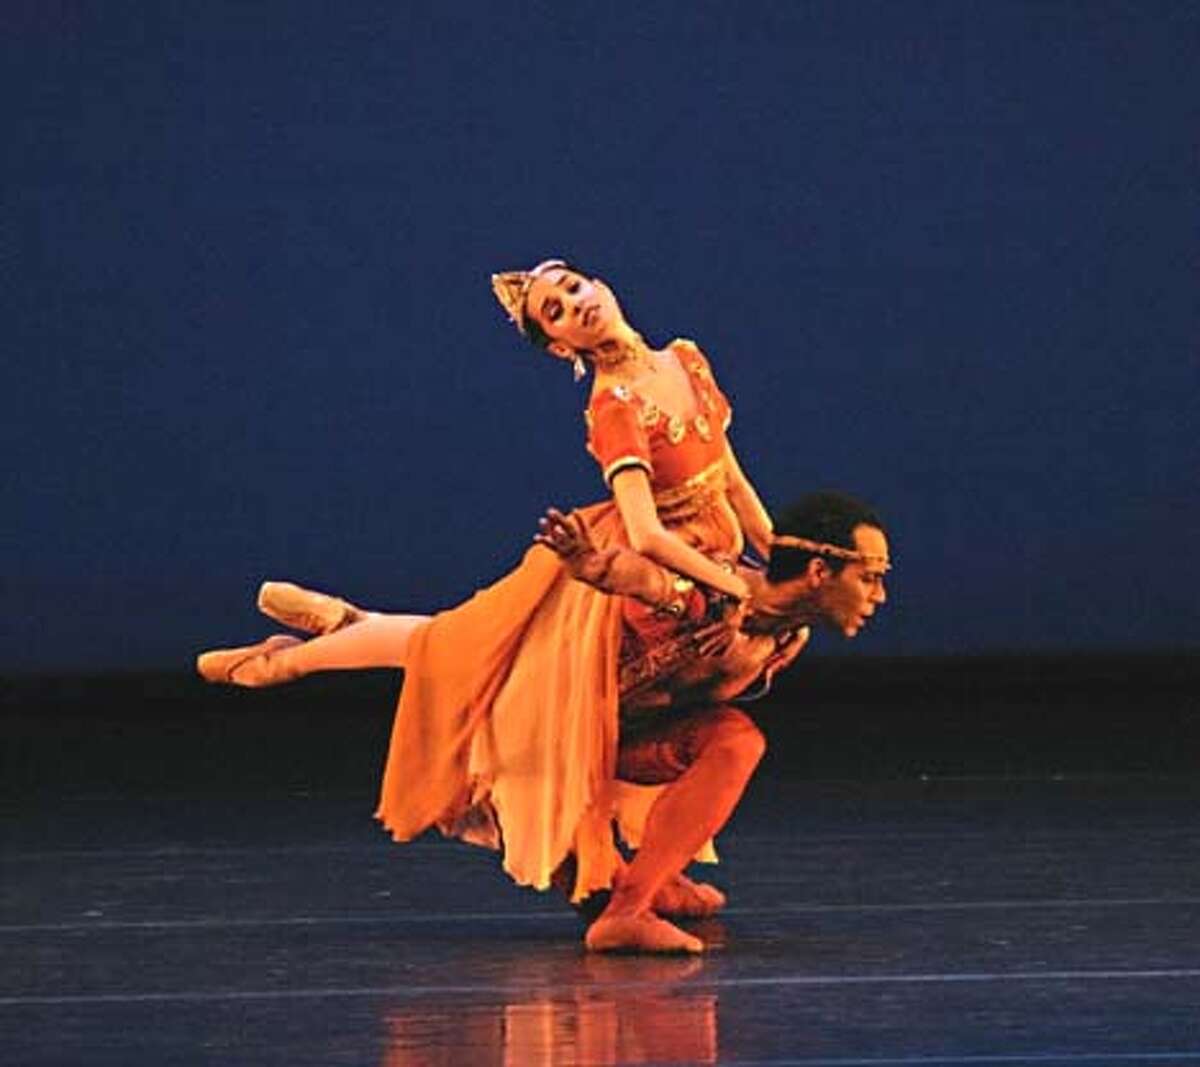 Pictured (Thais_03):� Duncan Cooper and Melissa Morrissey perform in Frederic Ashton�s �Meditation� from Thais, part of Dance Theatre of Harlem�s Cal Performances engagement at Zellerbach hall January 28 - February 1, 2004. on 1/27/04 in San Francisco. Joseph Rodman Joseph Rodman / HO